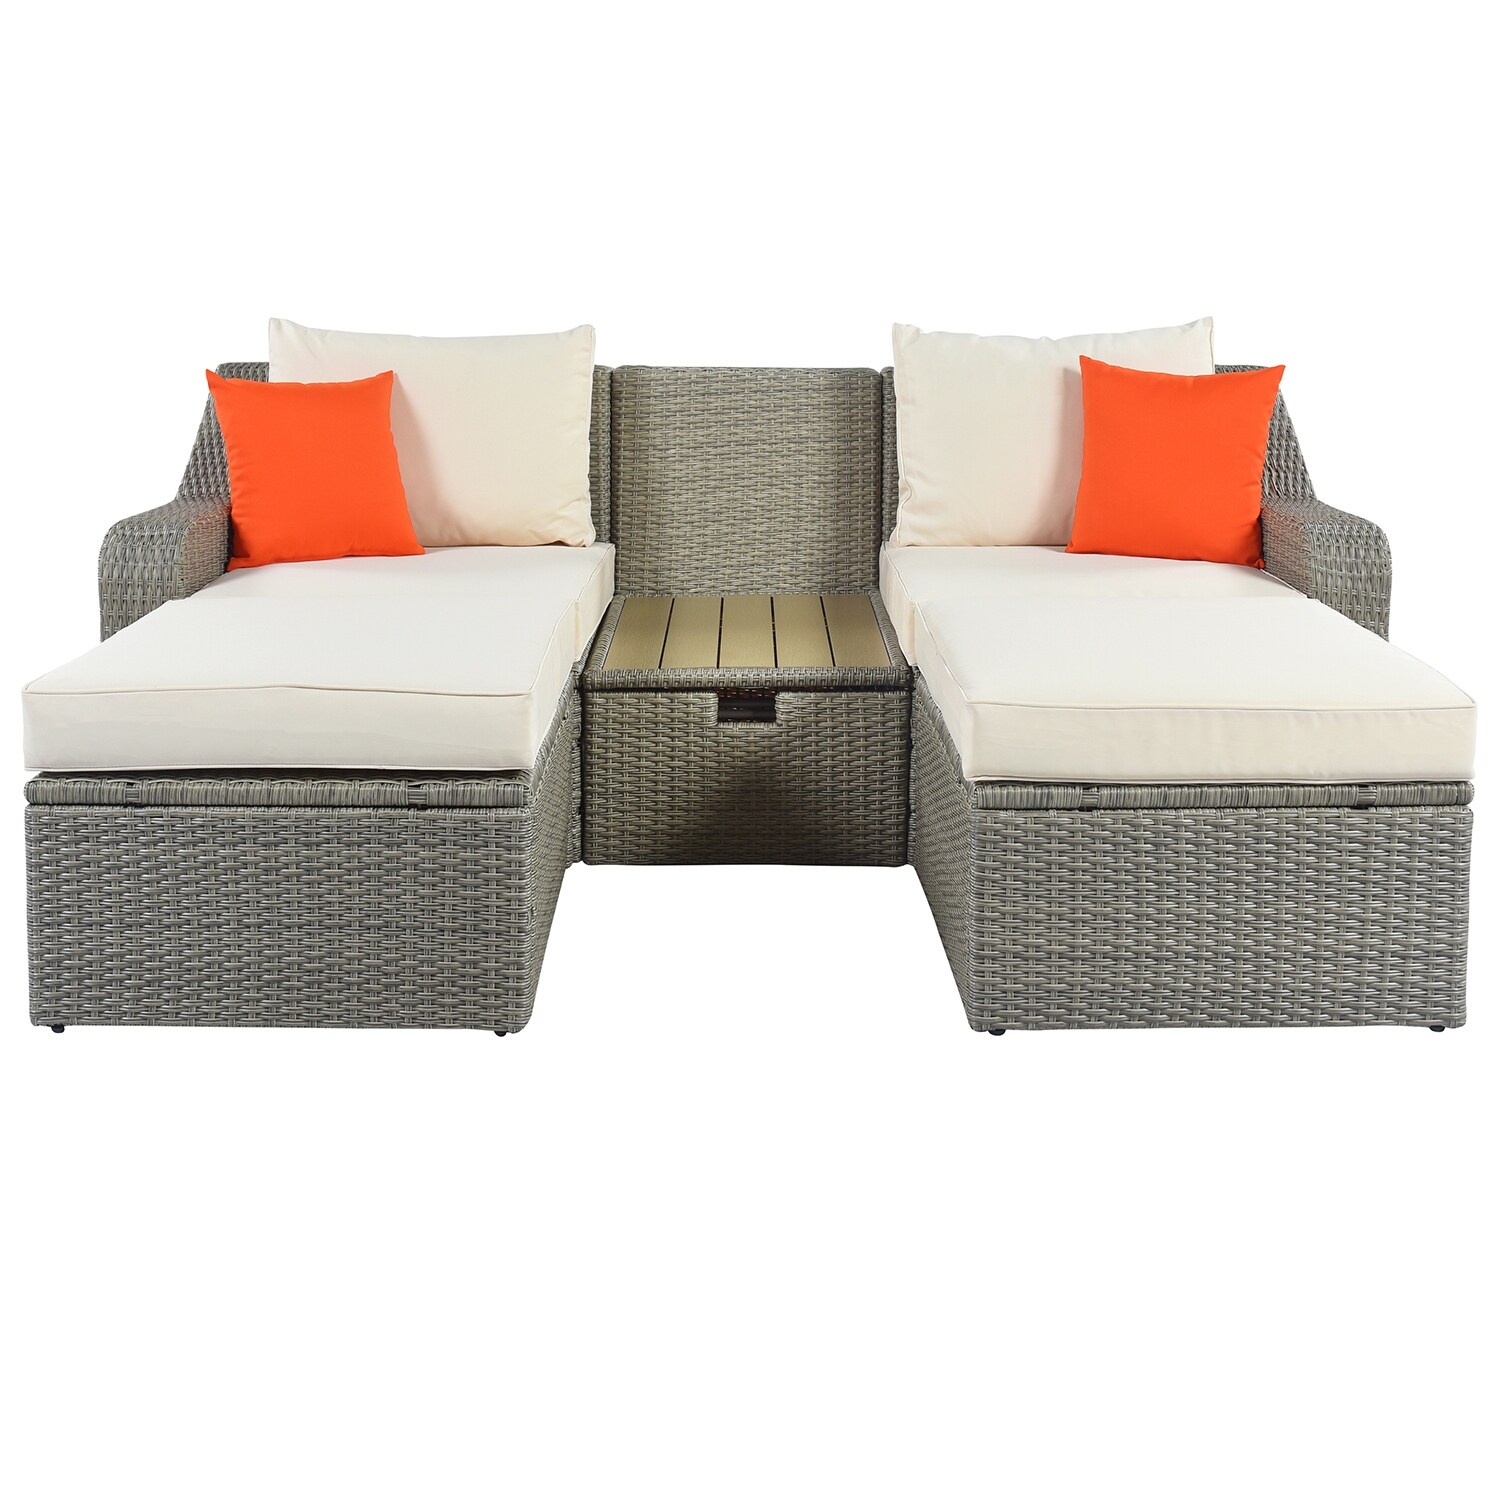 3pieces Patio Furniture Sets wicker Sofa With Cushions And Ottomans